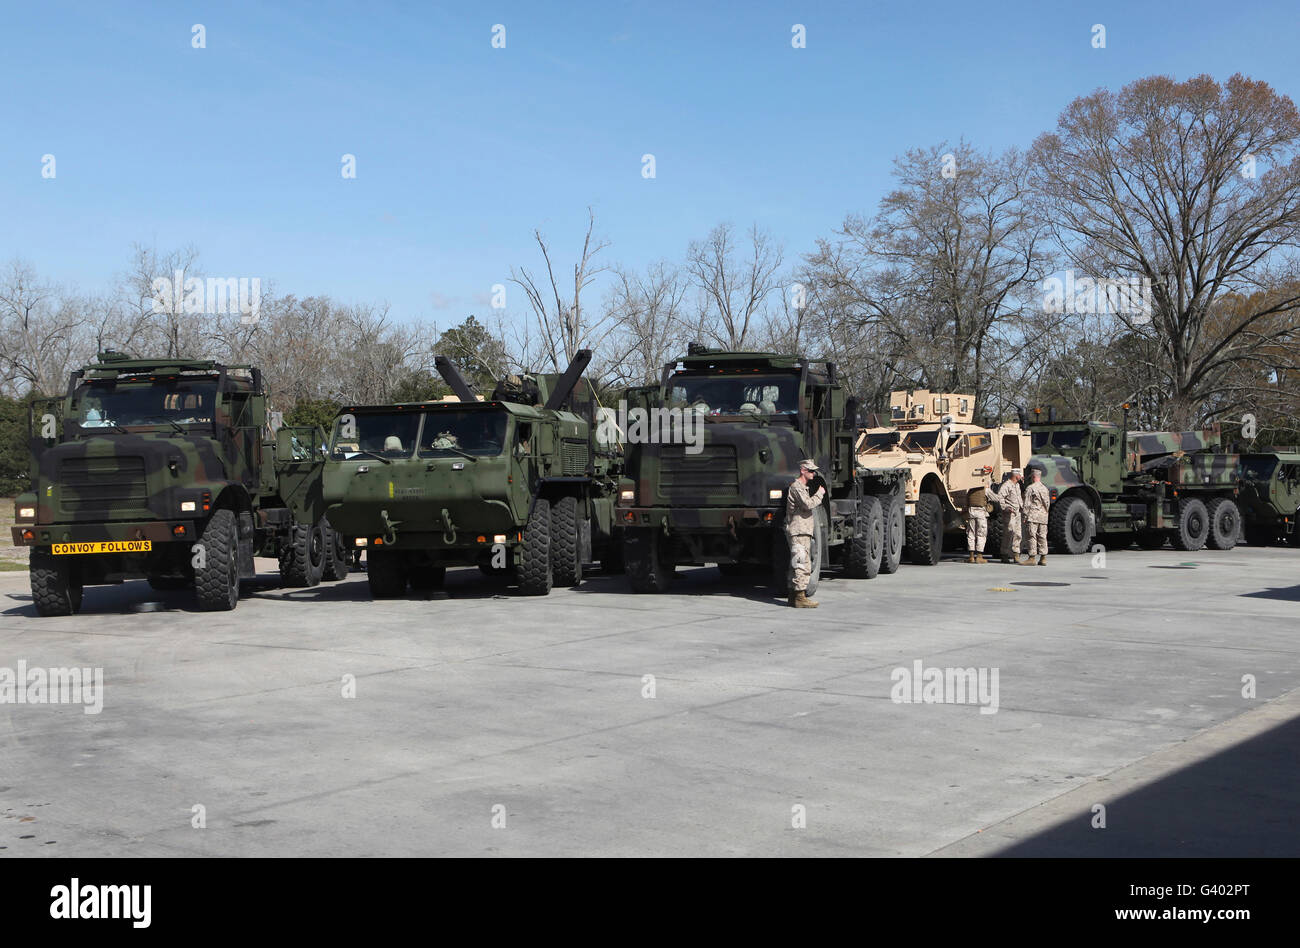 Military trucks lined up prior to refueling. Stock Photo